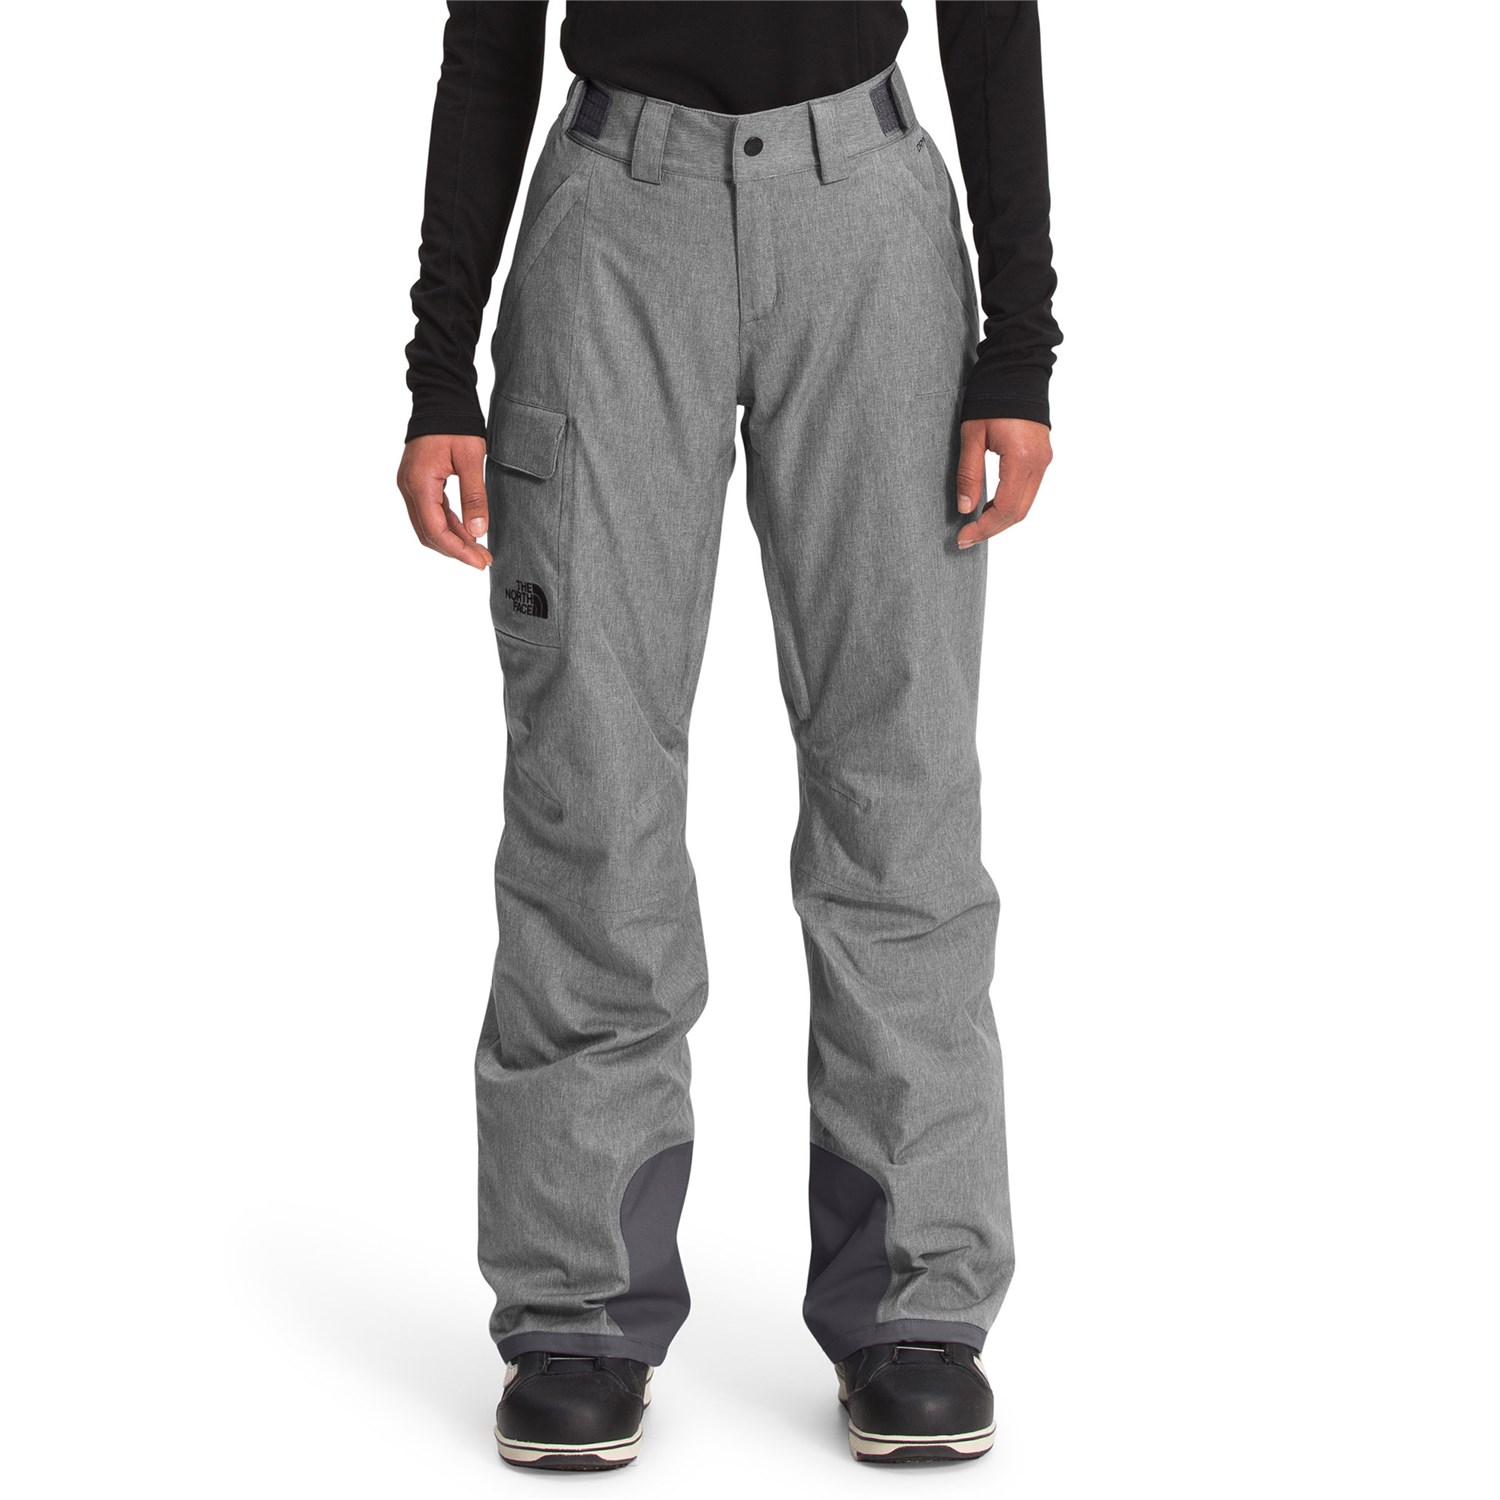 Athleta Solid Gray Active Pants Size 10 (Tall) - 57% off